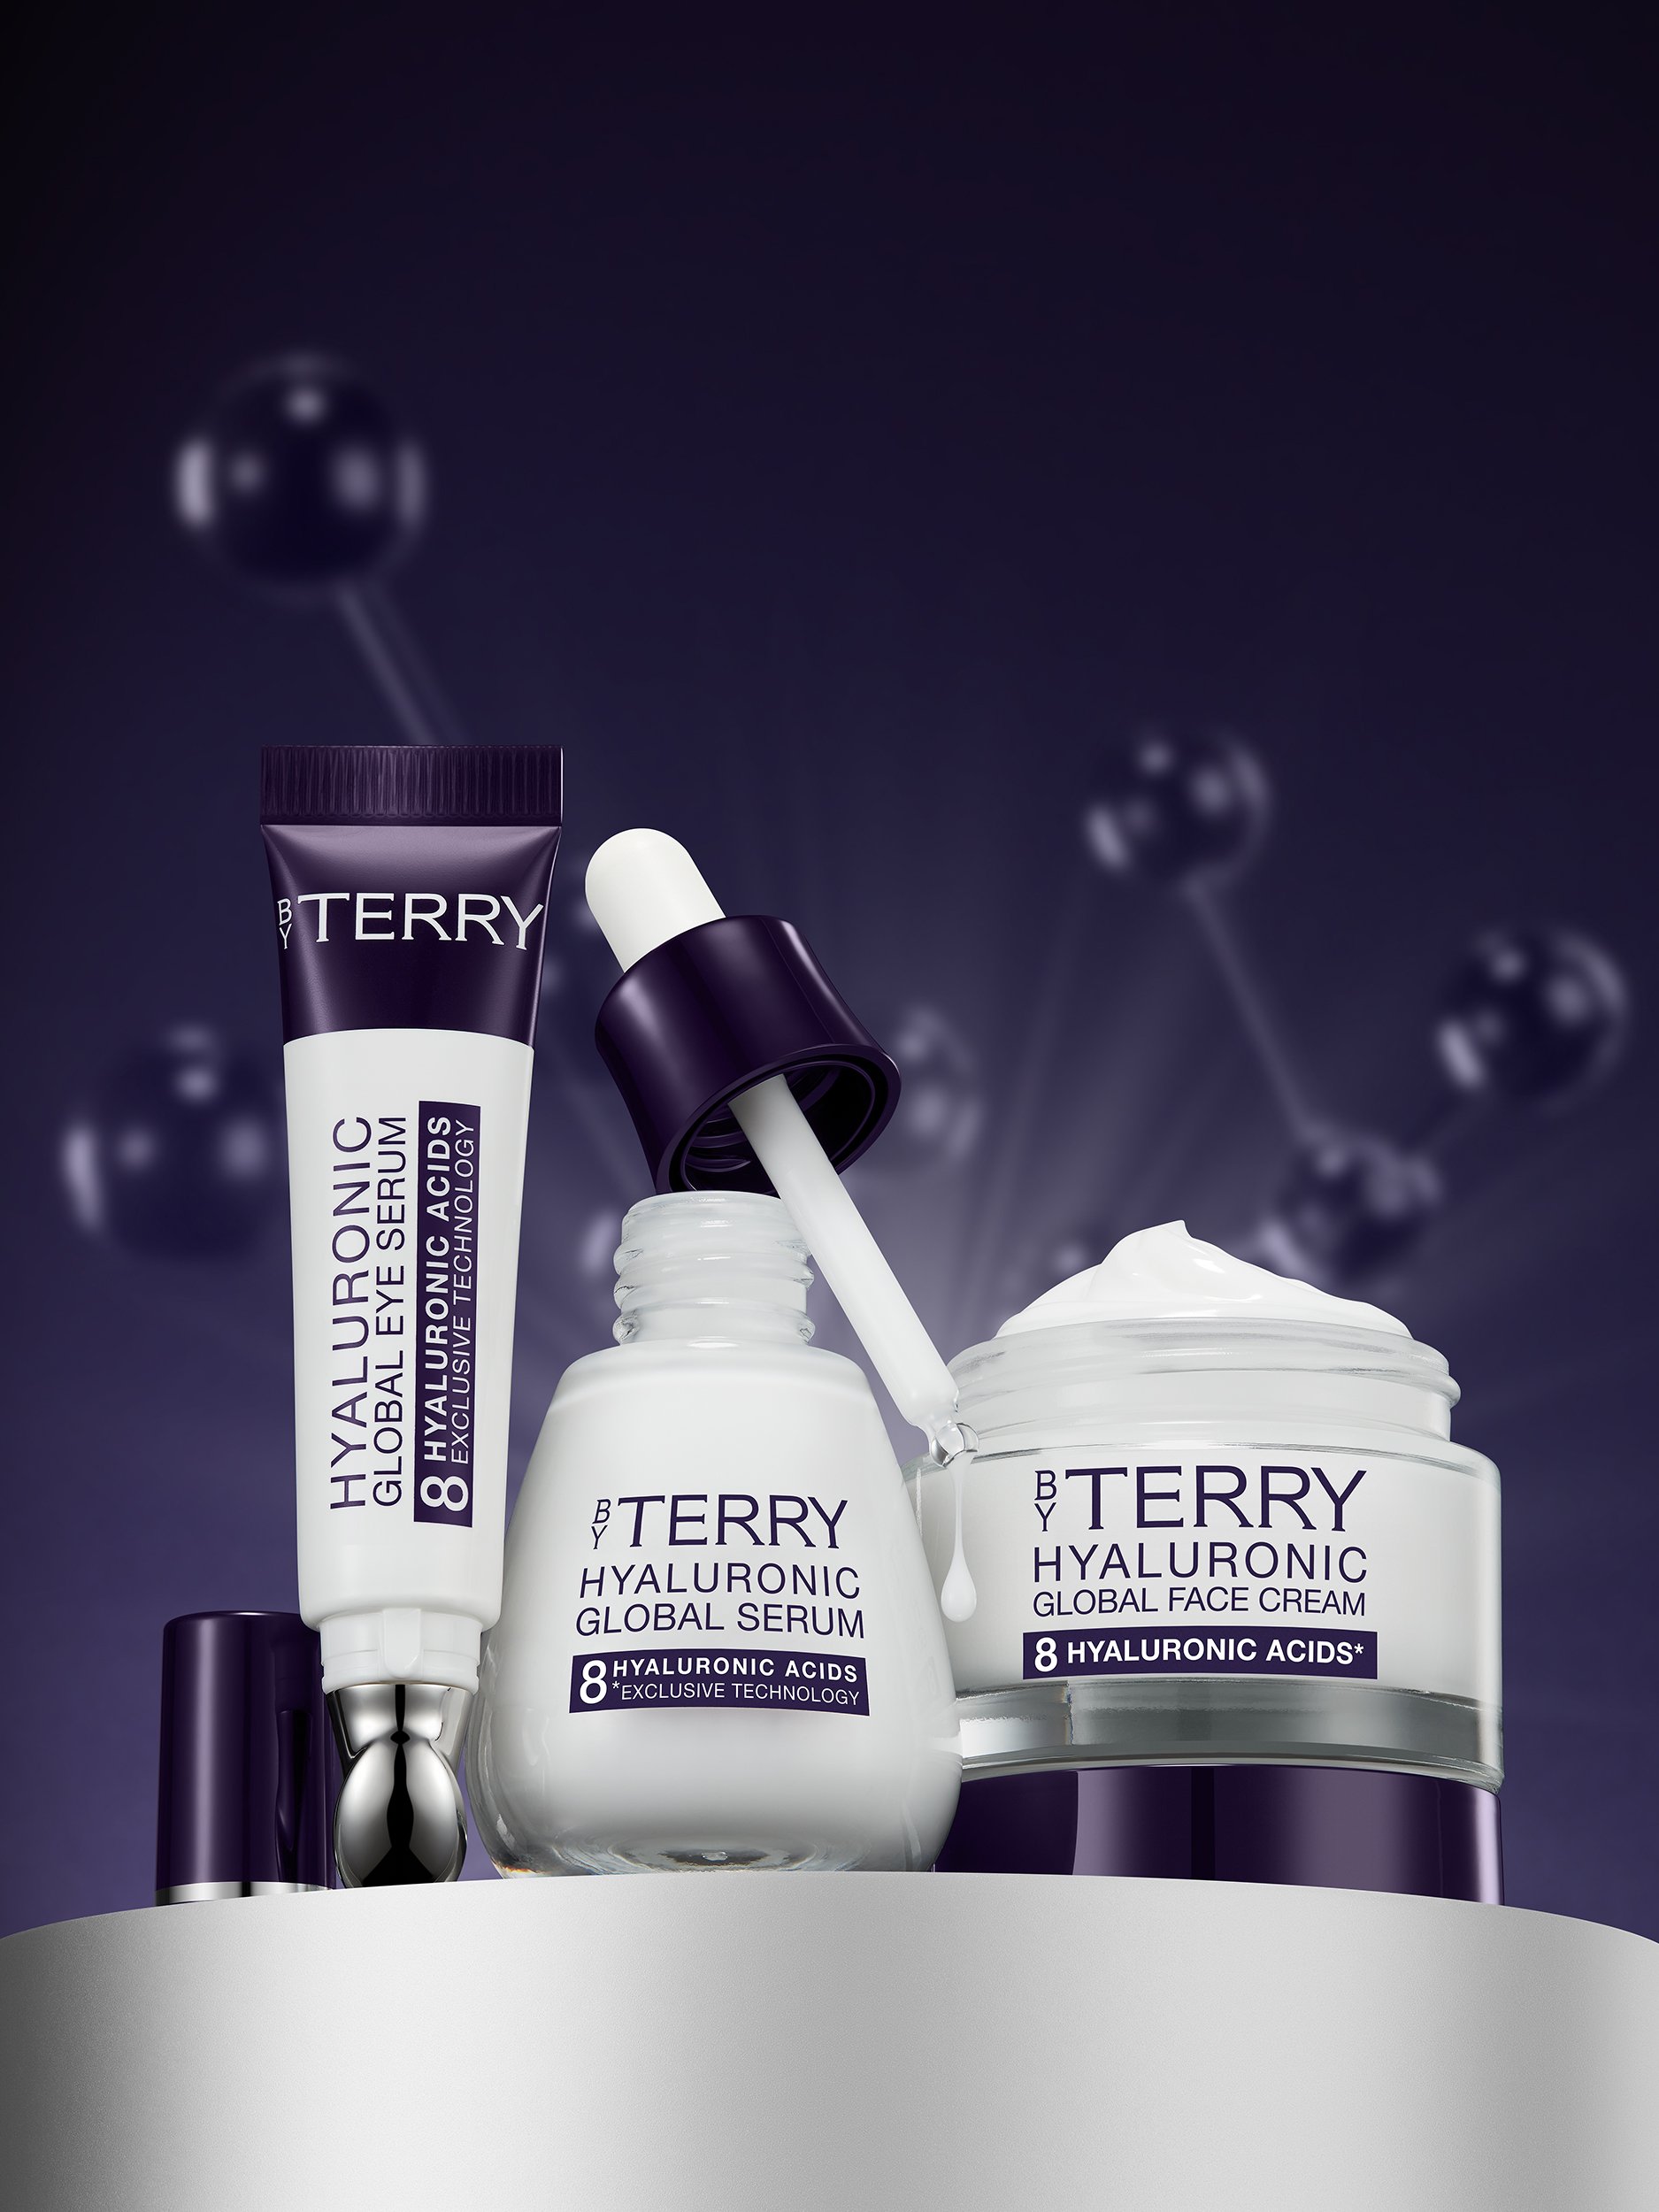 ByTerry Hyaluronic Global Hydration - Advertising by London-based cosmetics photographer Simon Lyle Ritchie